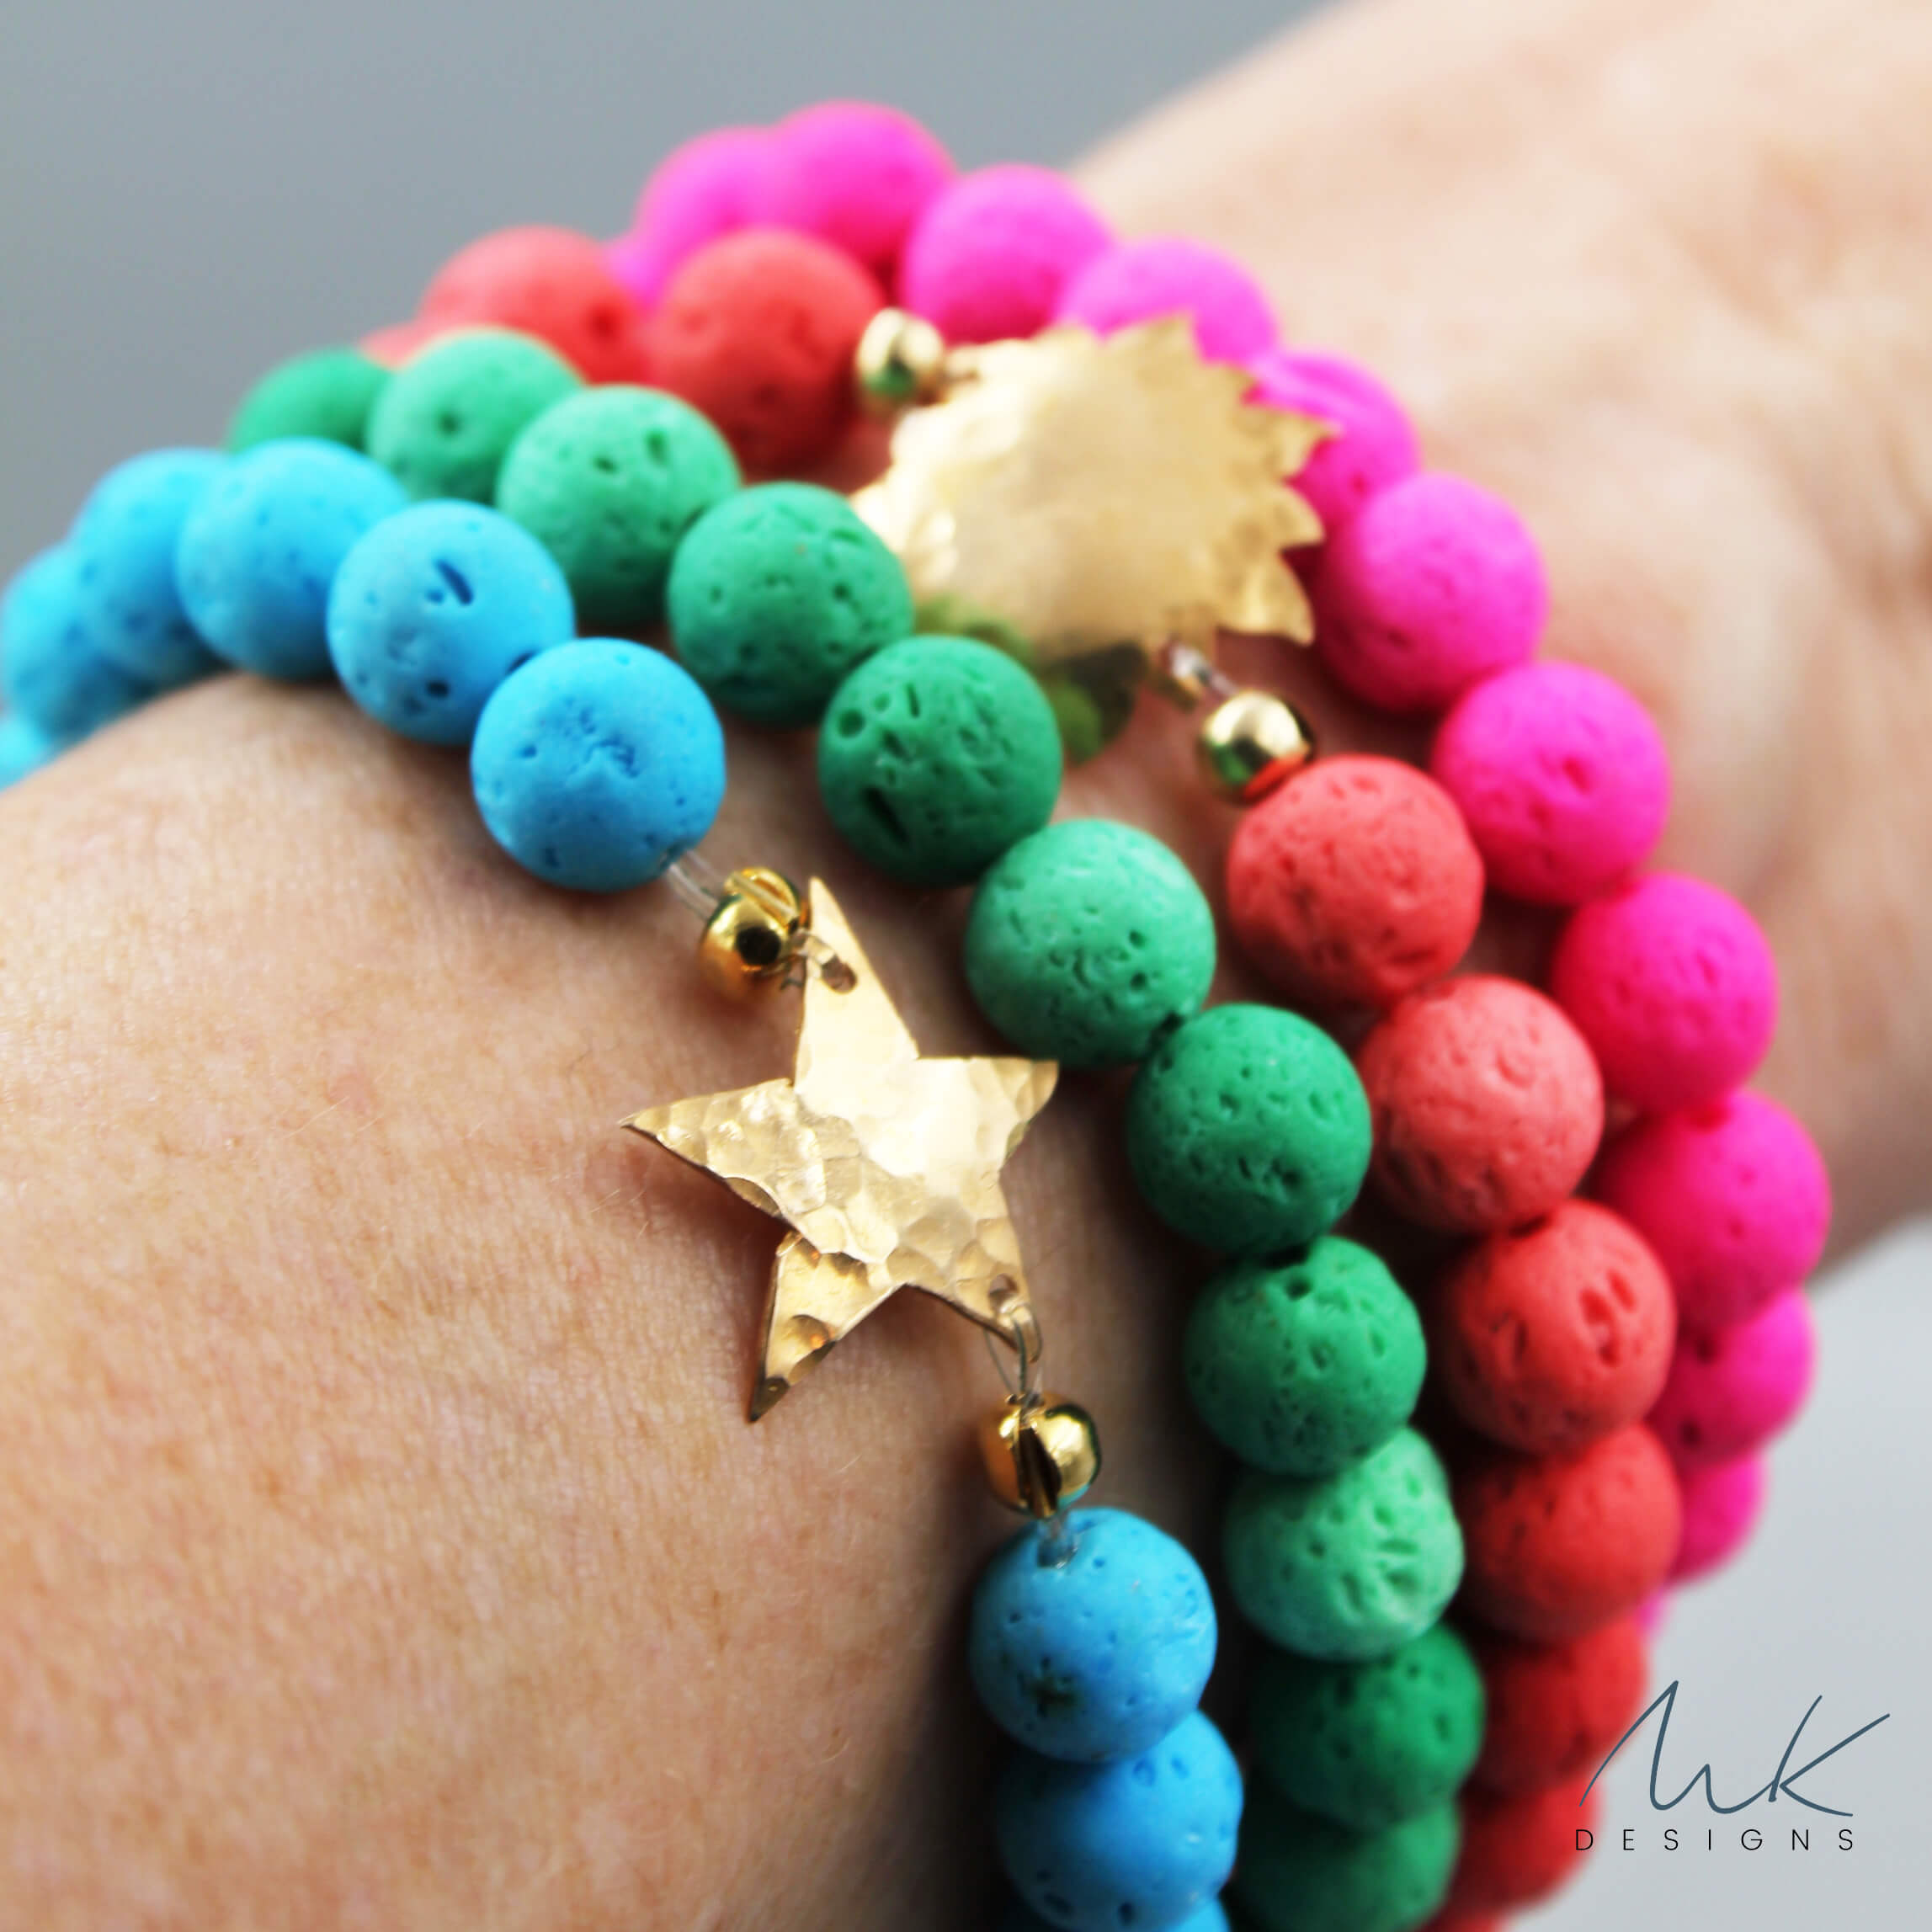 Stacked Bright Colorful Celestial Bracelets